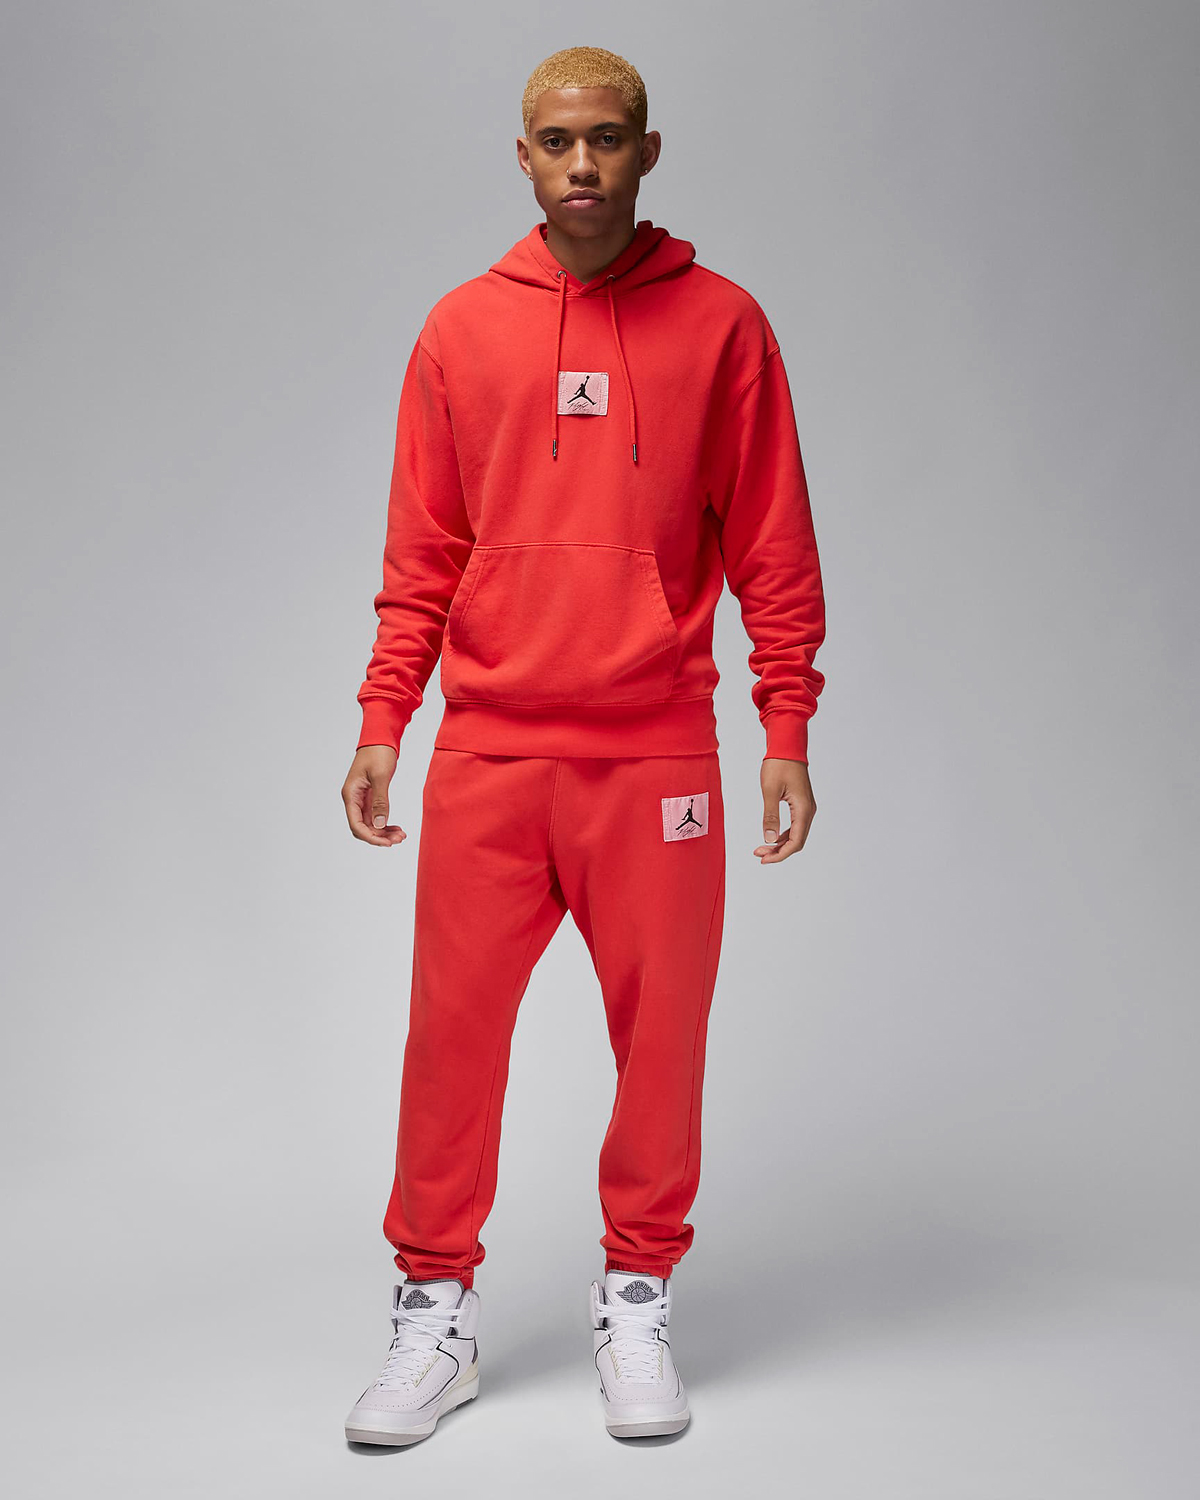 Jordan-Essentials-Washed-Hoodie-and-Pants-Lobster-Red-Outfit